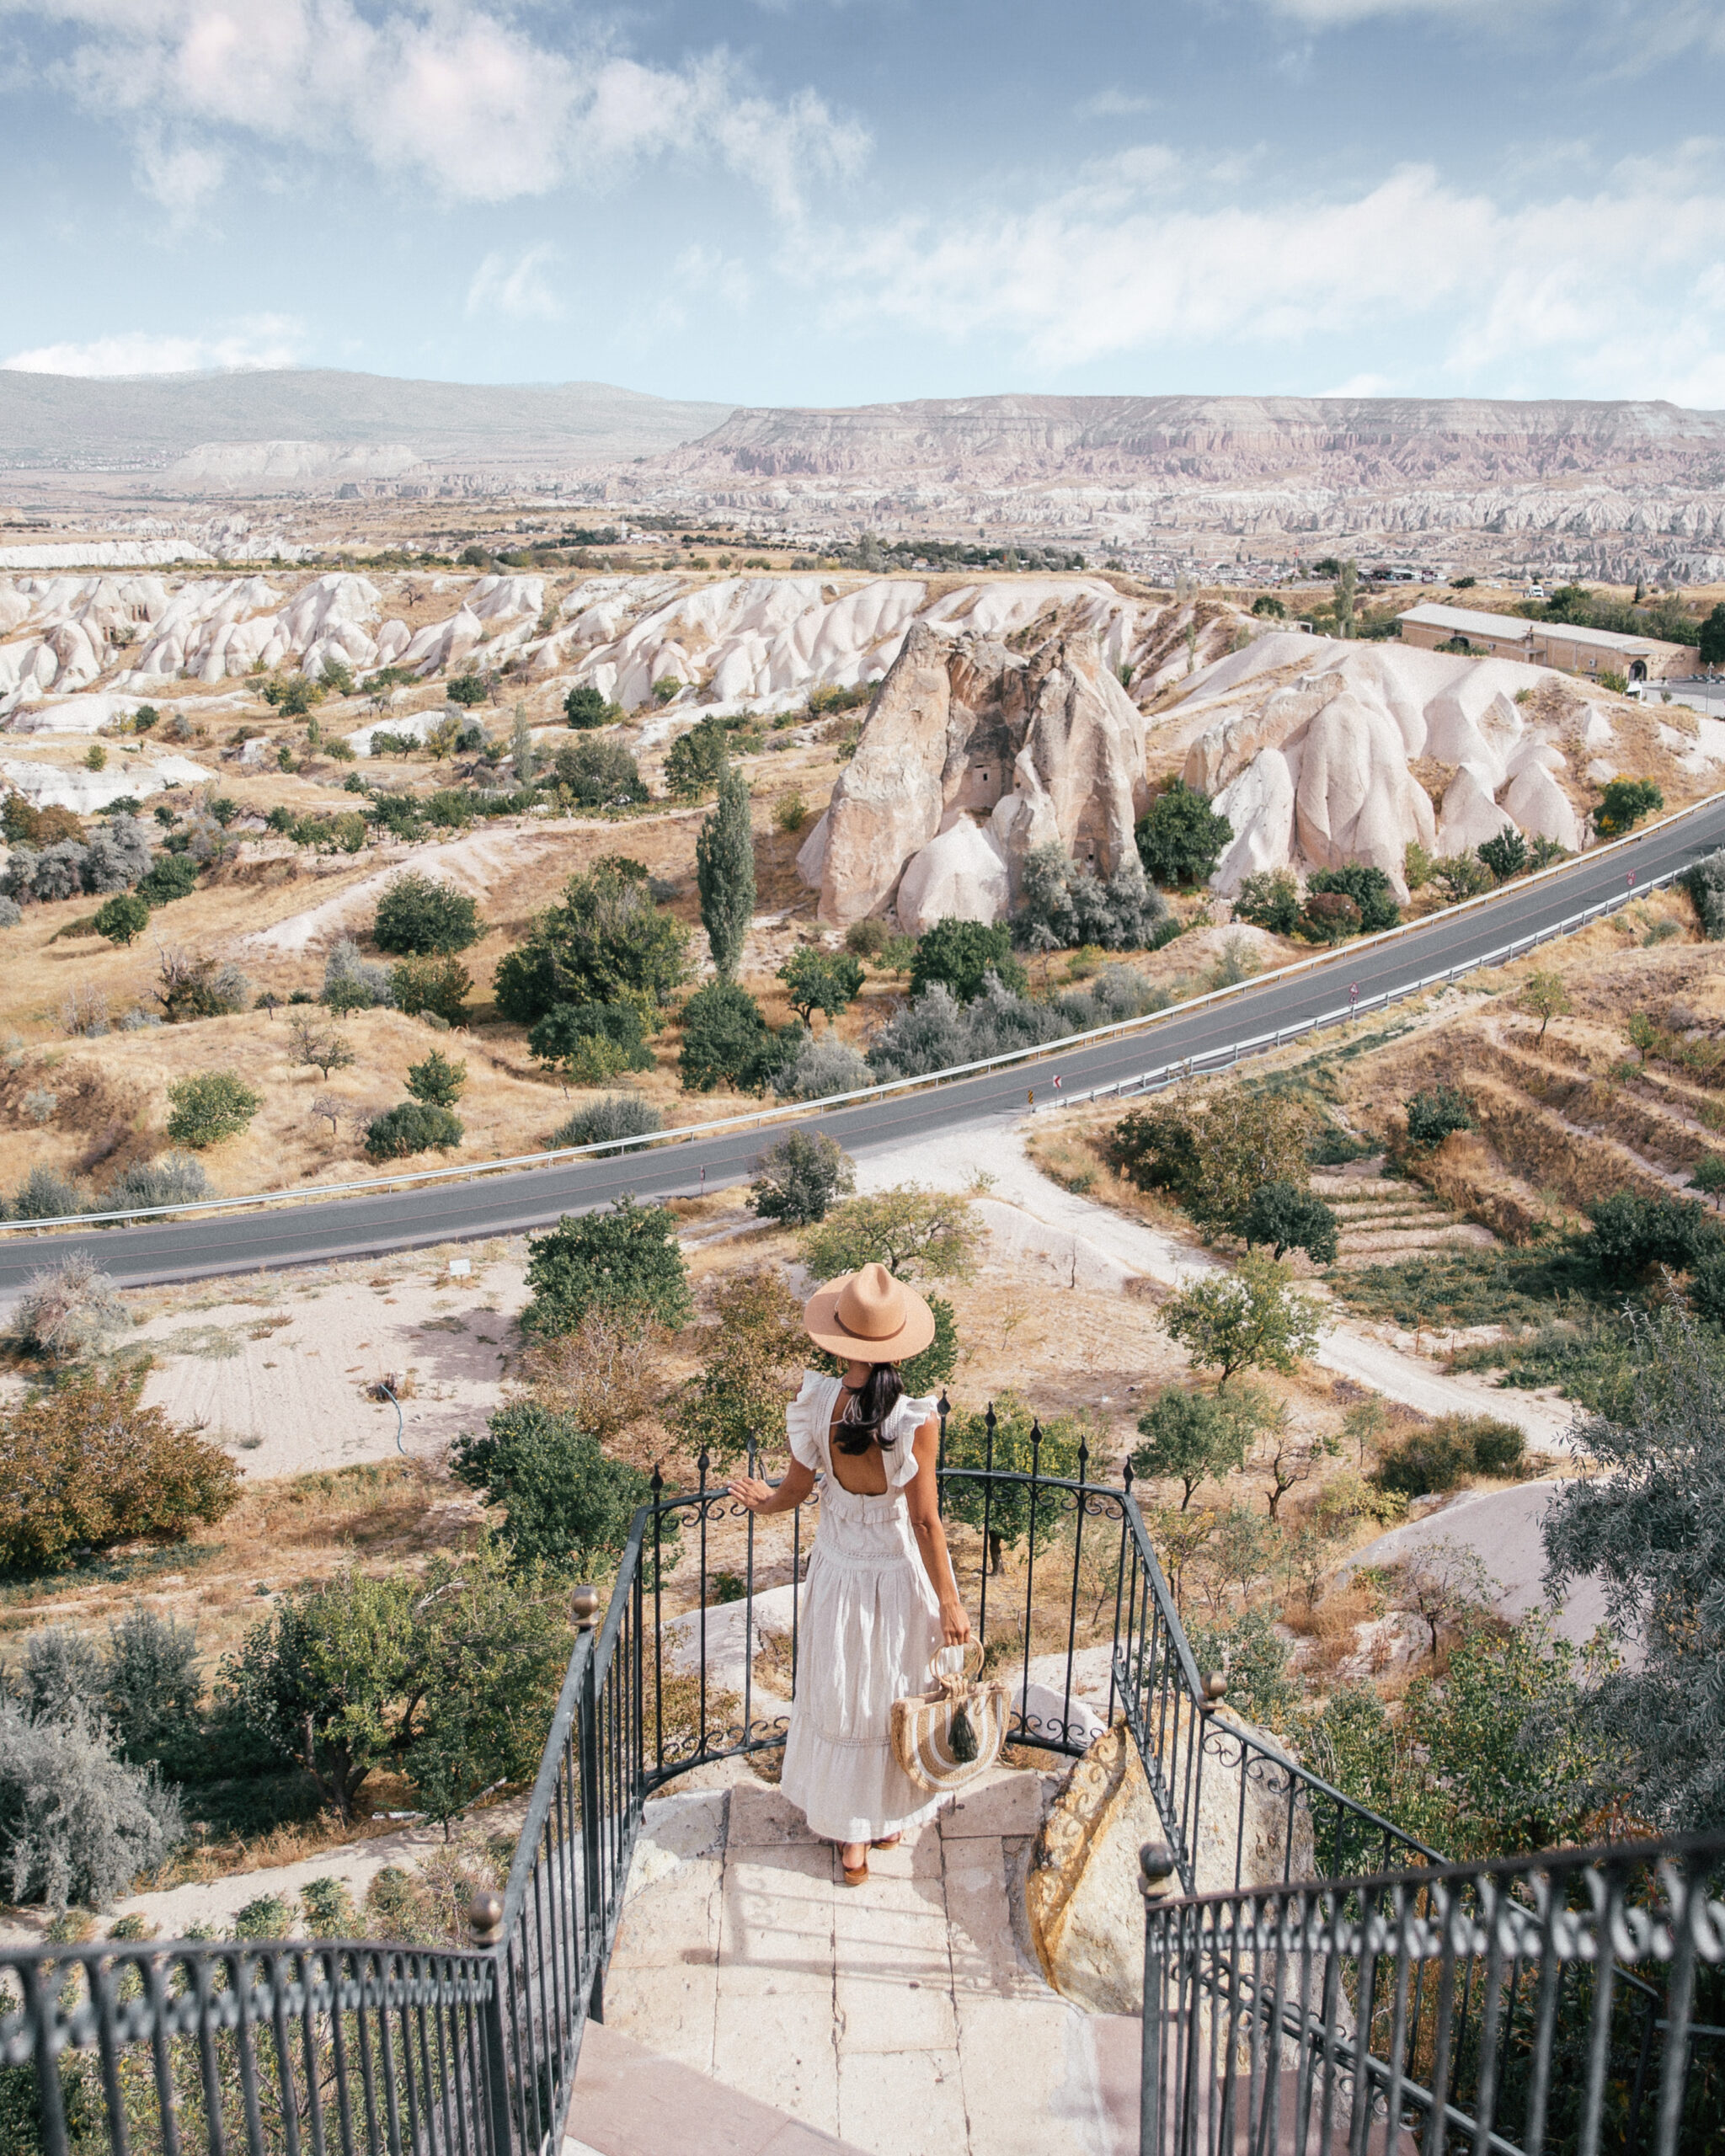 The ultimate guide to Cappadocia including the best cave hotels, sunrise spots, hot air balloon companies, restaurants, cave pools and more.